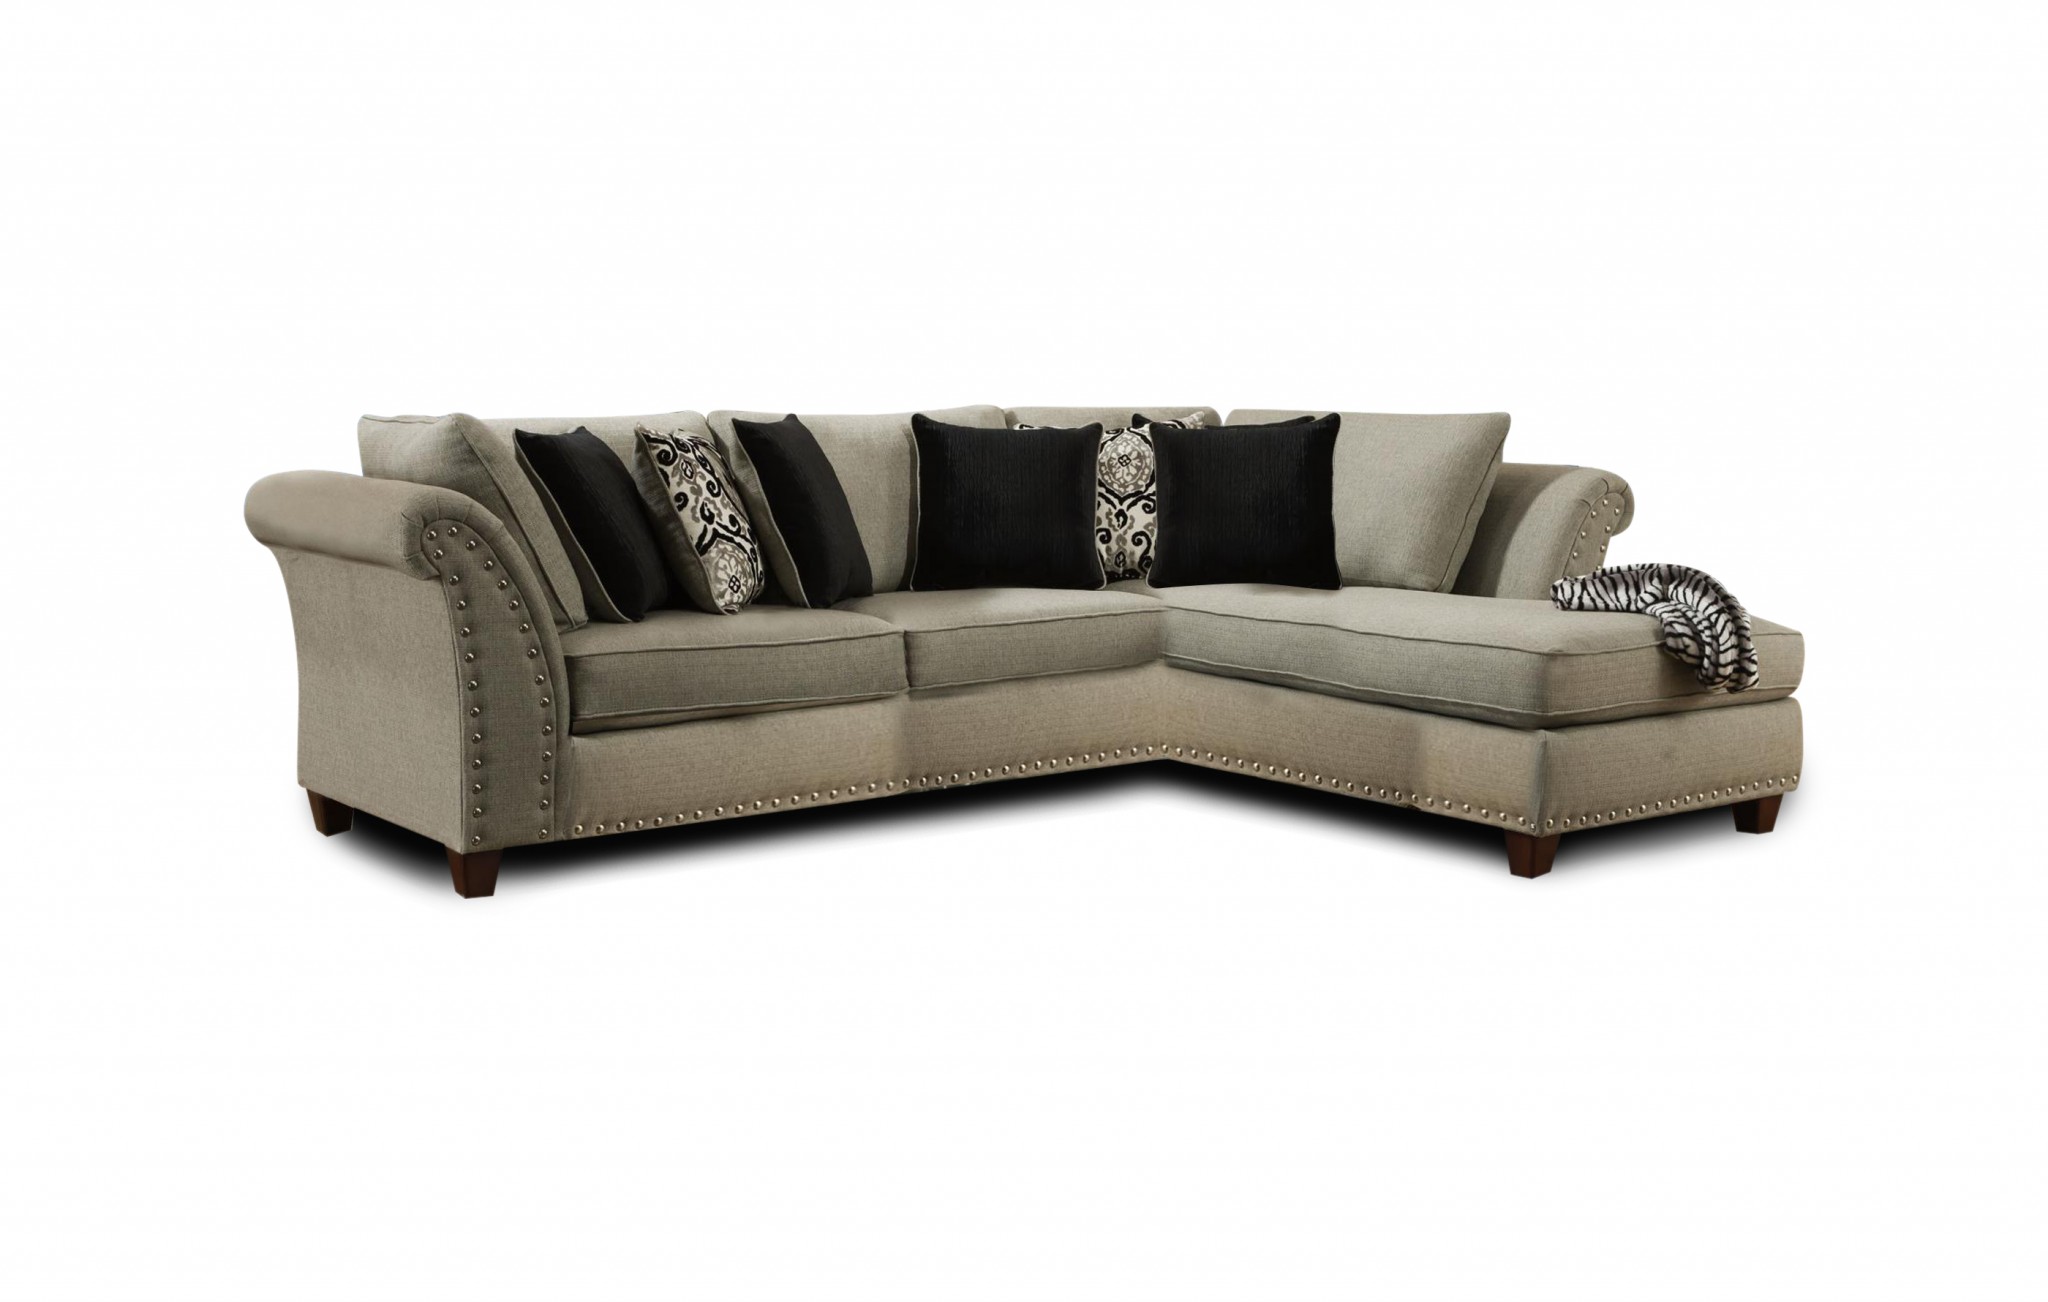 125" X 120" X 34.5" Zues Gray 100% Polyester Sectional